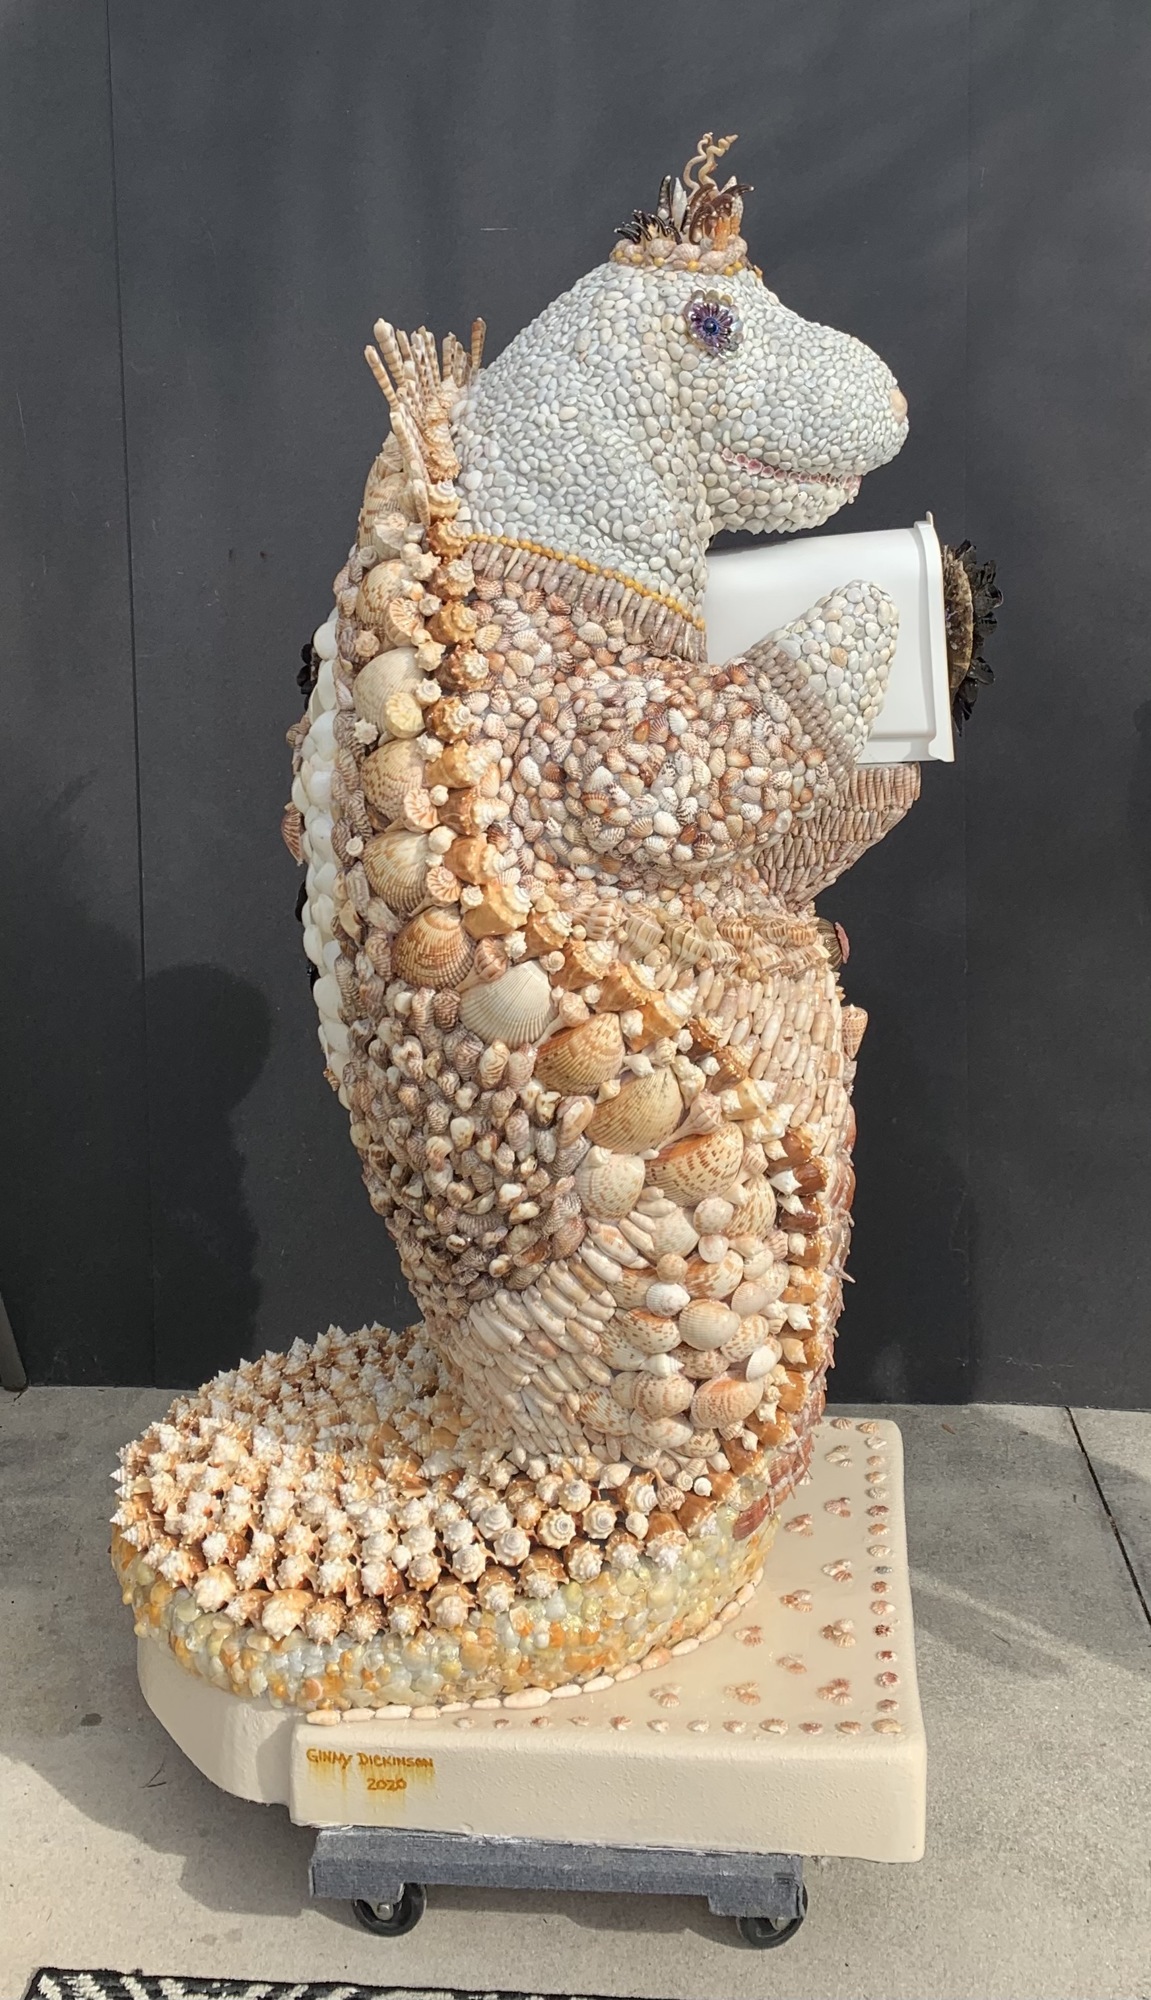 Courtesy. Ginny Dickinson recently created Her Royal Majesty – Manatee Mer, a seashell sculpture. This is her third sculpture, and like the other two, will be auctioned for charity.